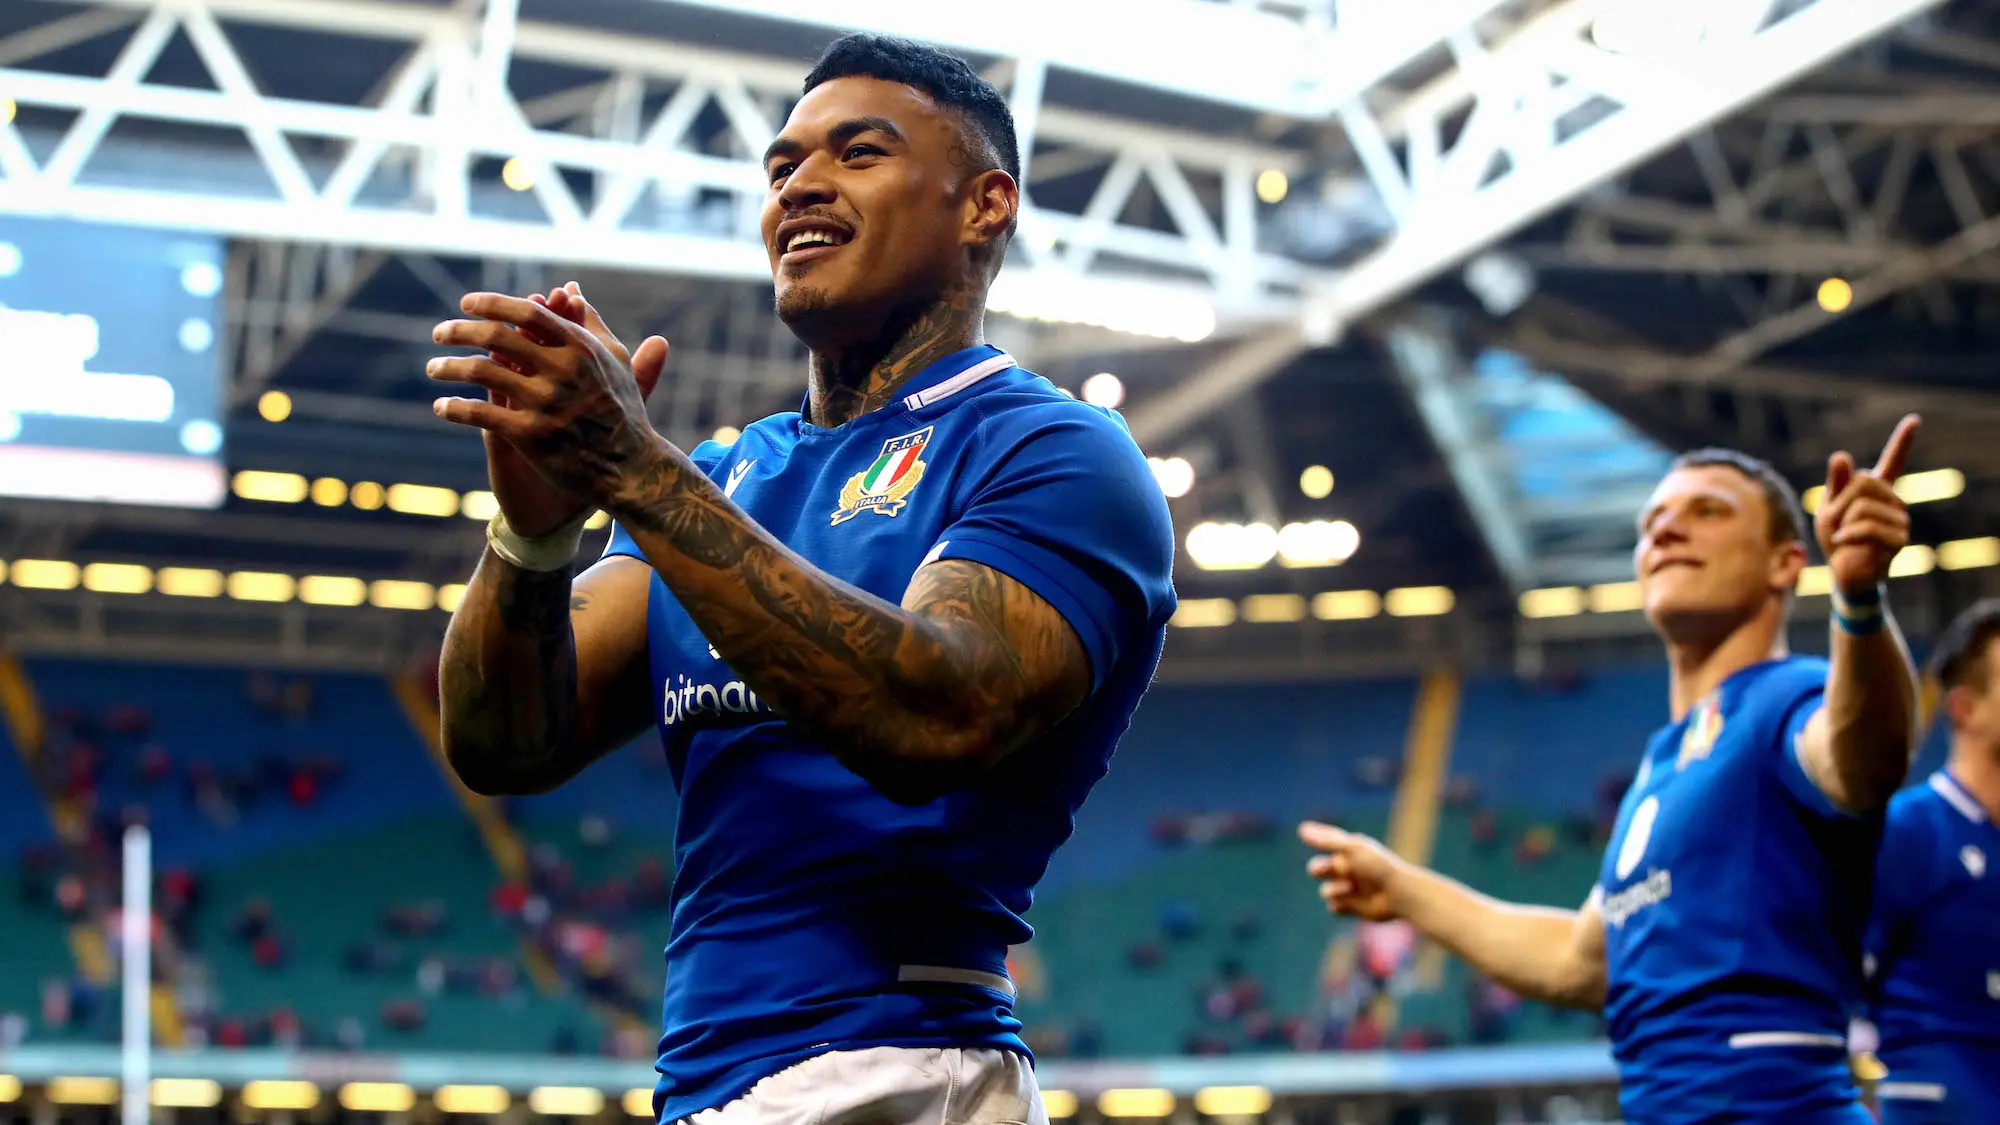 Monty Ioane celebrates after the game 19/3/2022